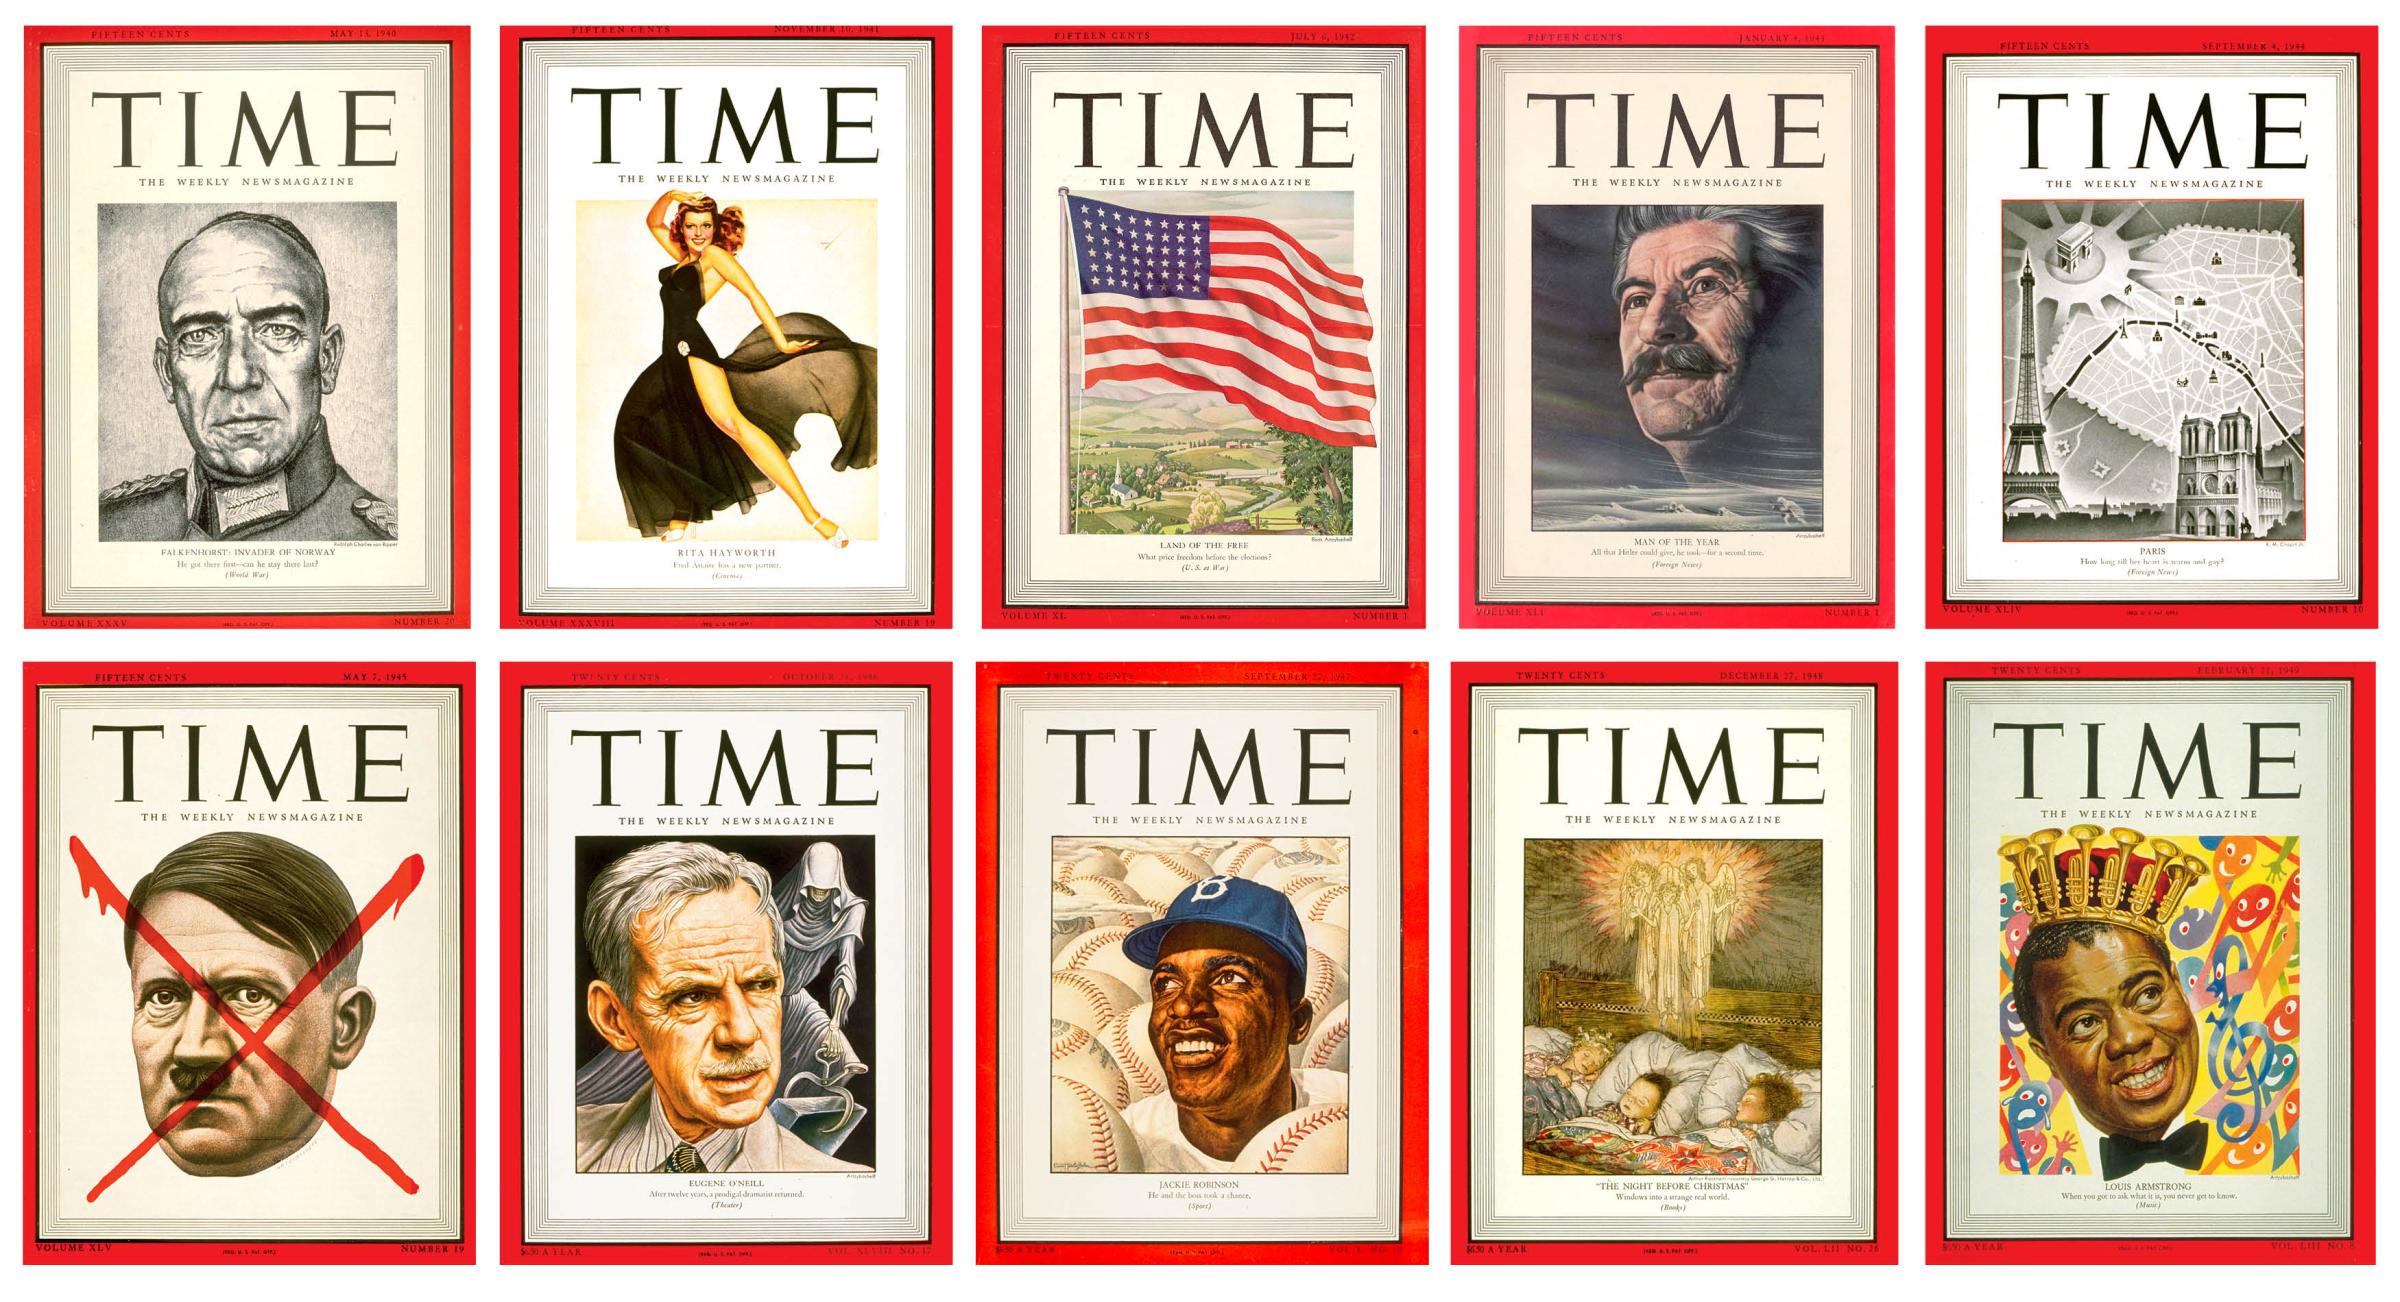 TIME cover decades 1940s